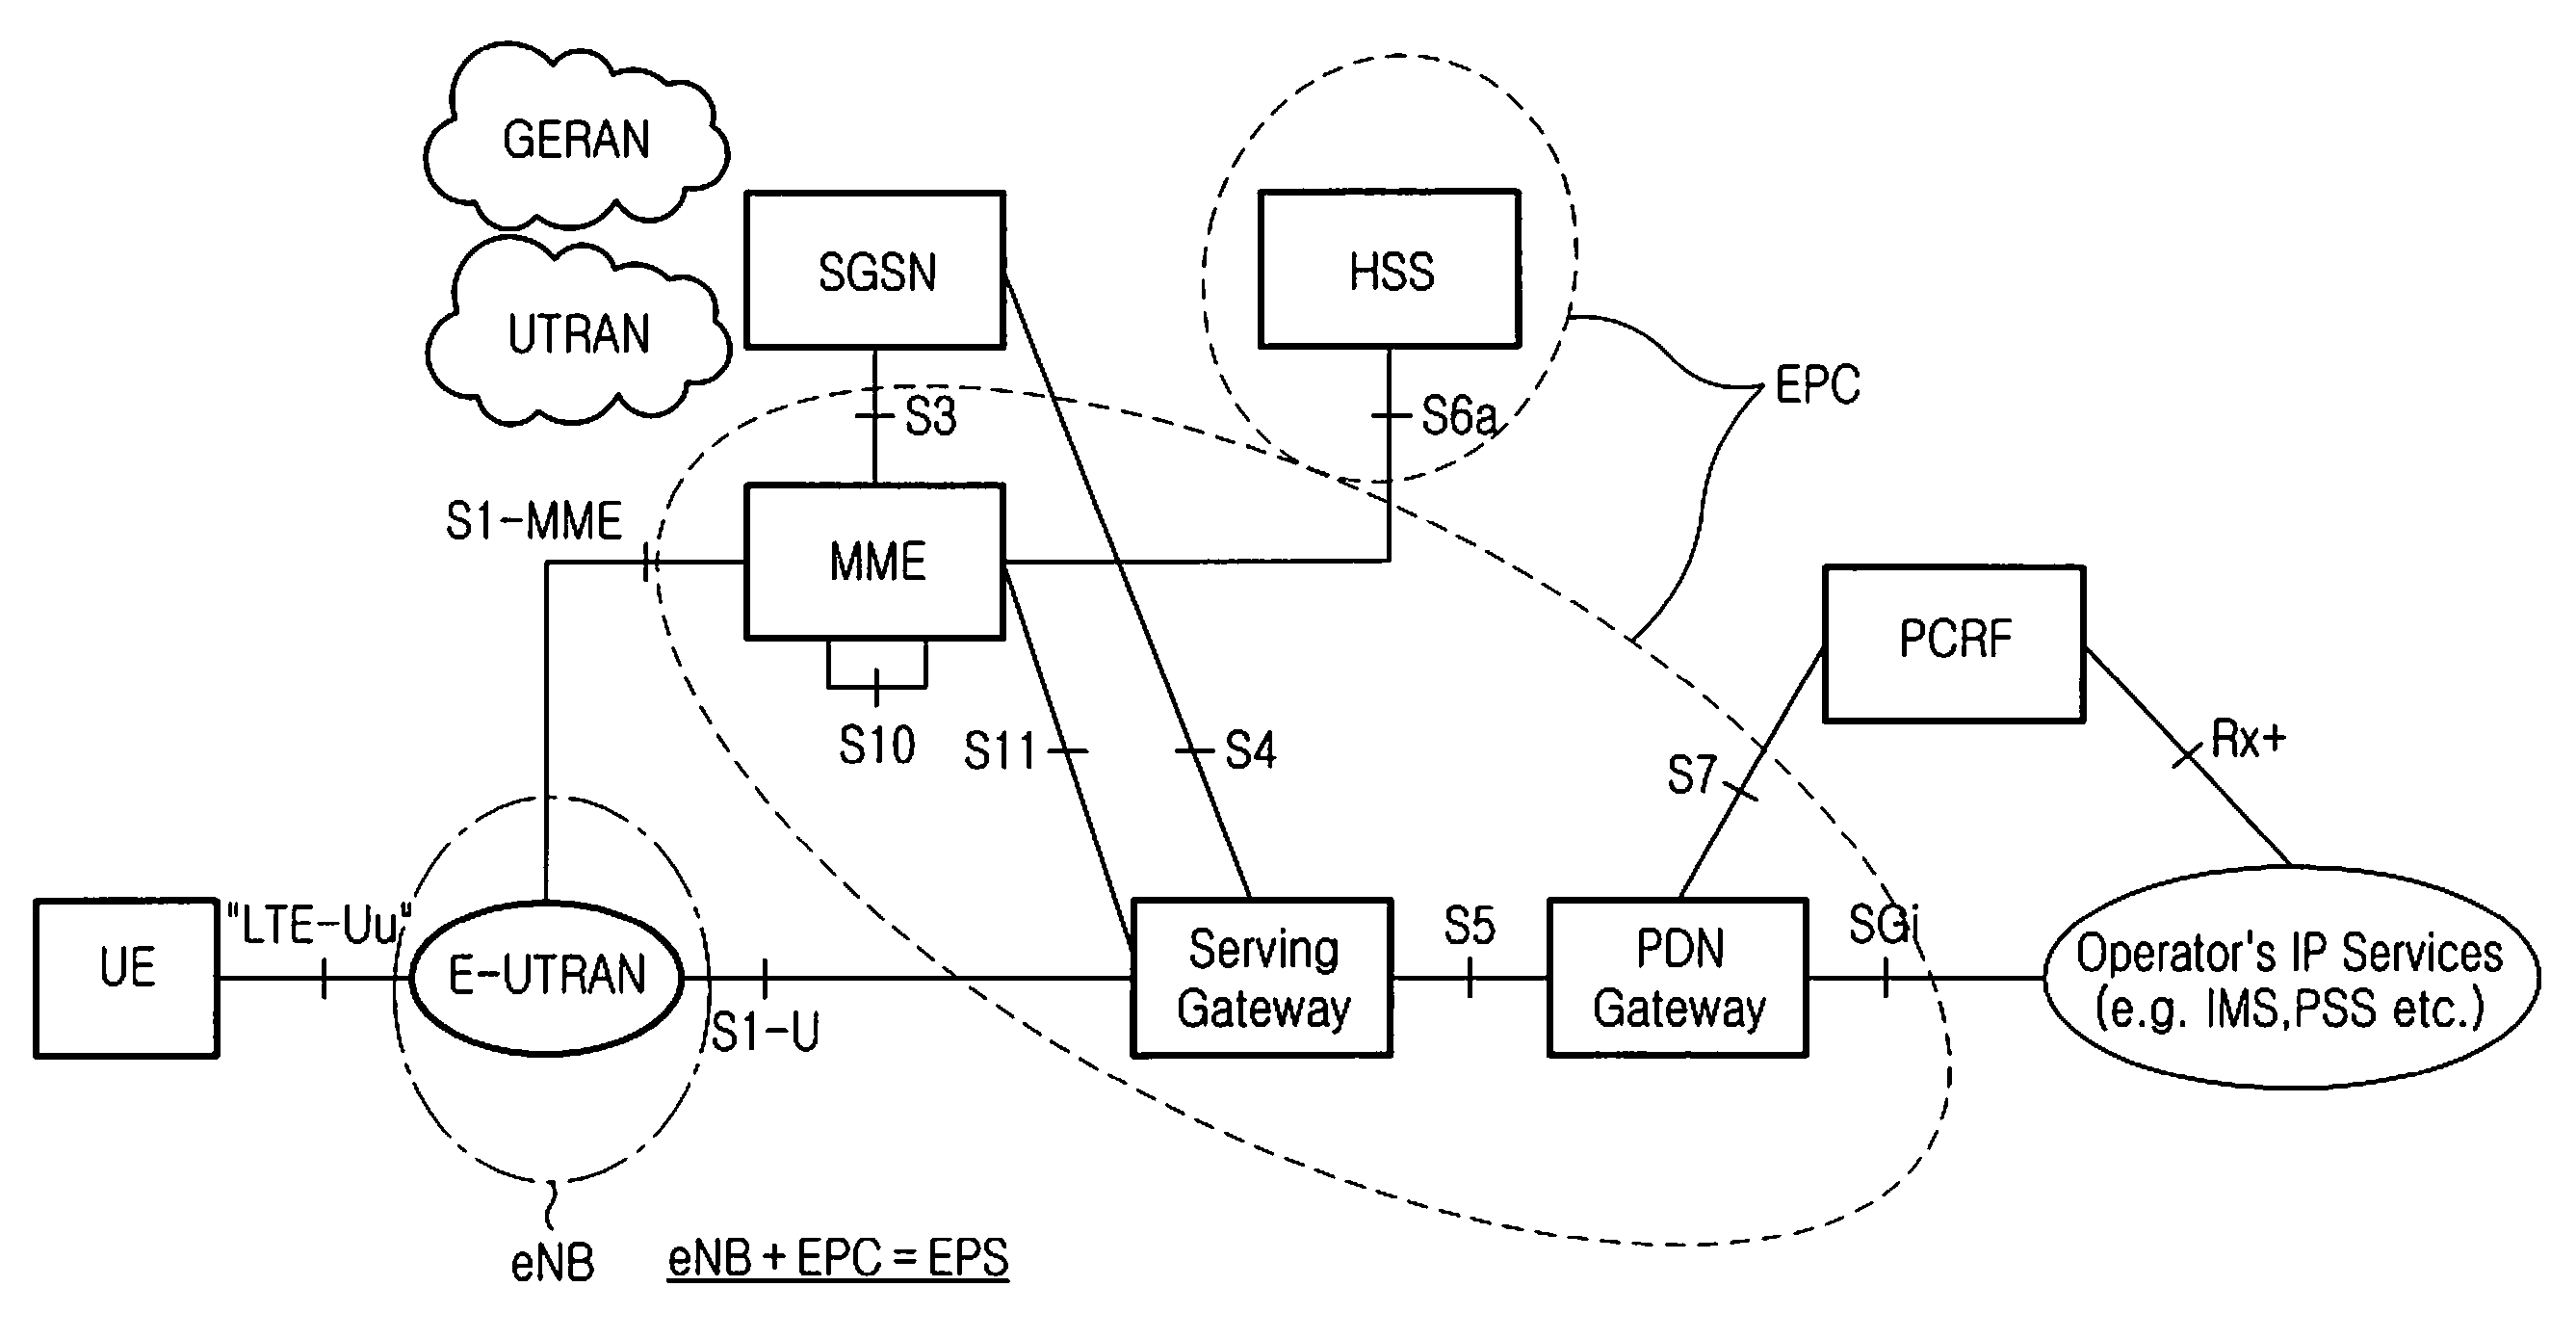 Method and apparatus for user equipment interaction with a network using interaction information